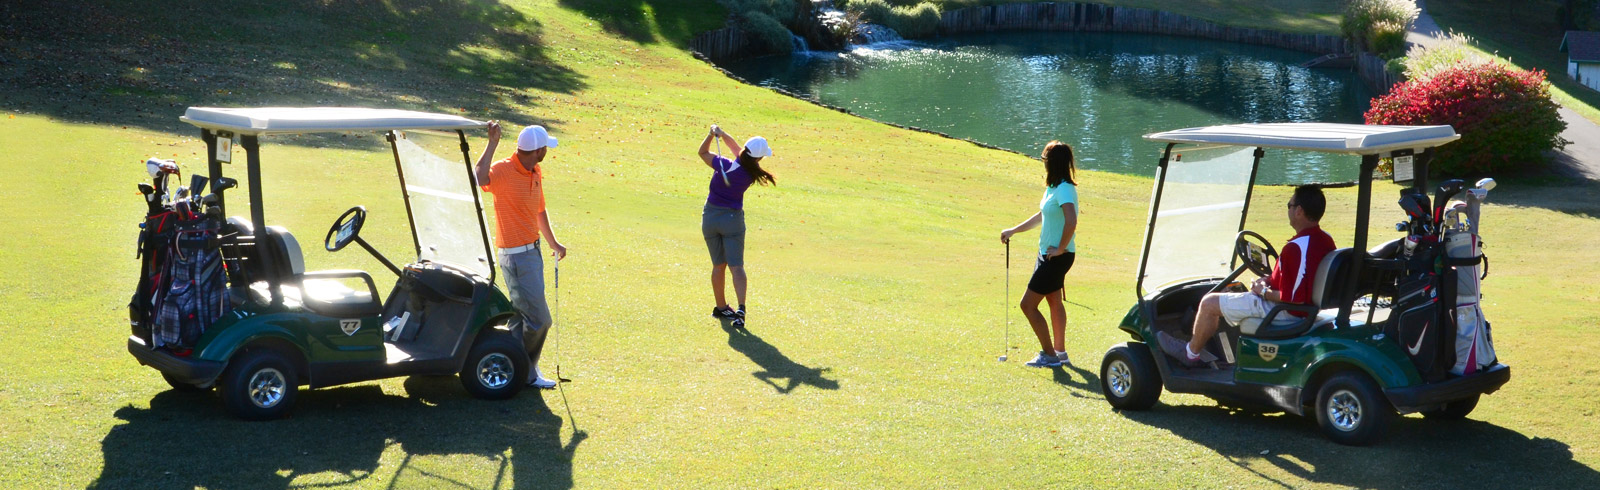 Tee Off Faster With Online Lake of the Ozarks Tee Times